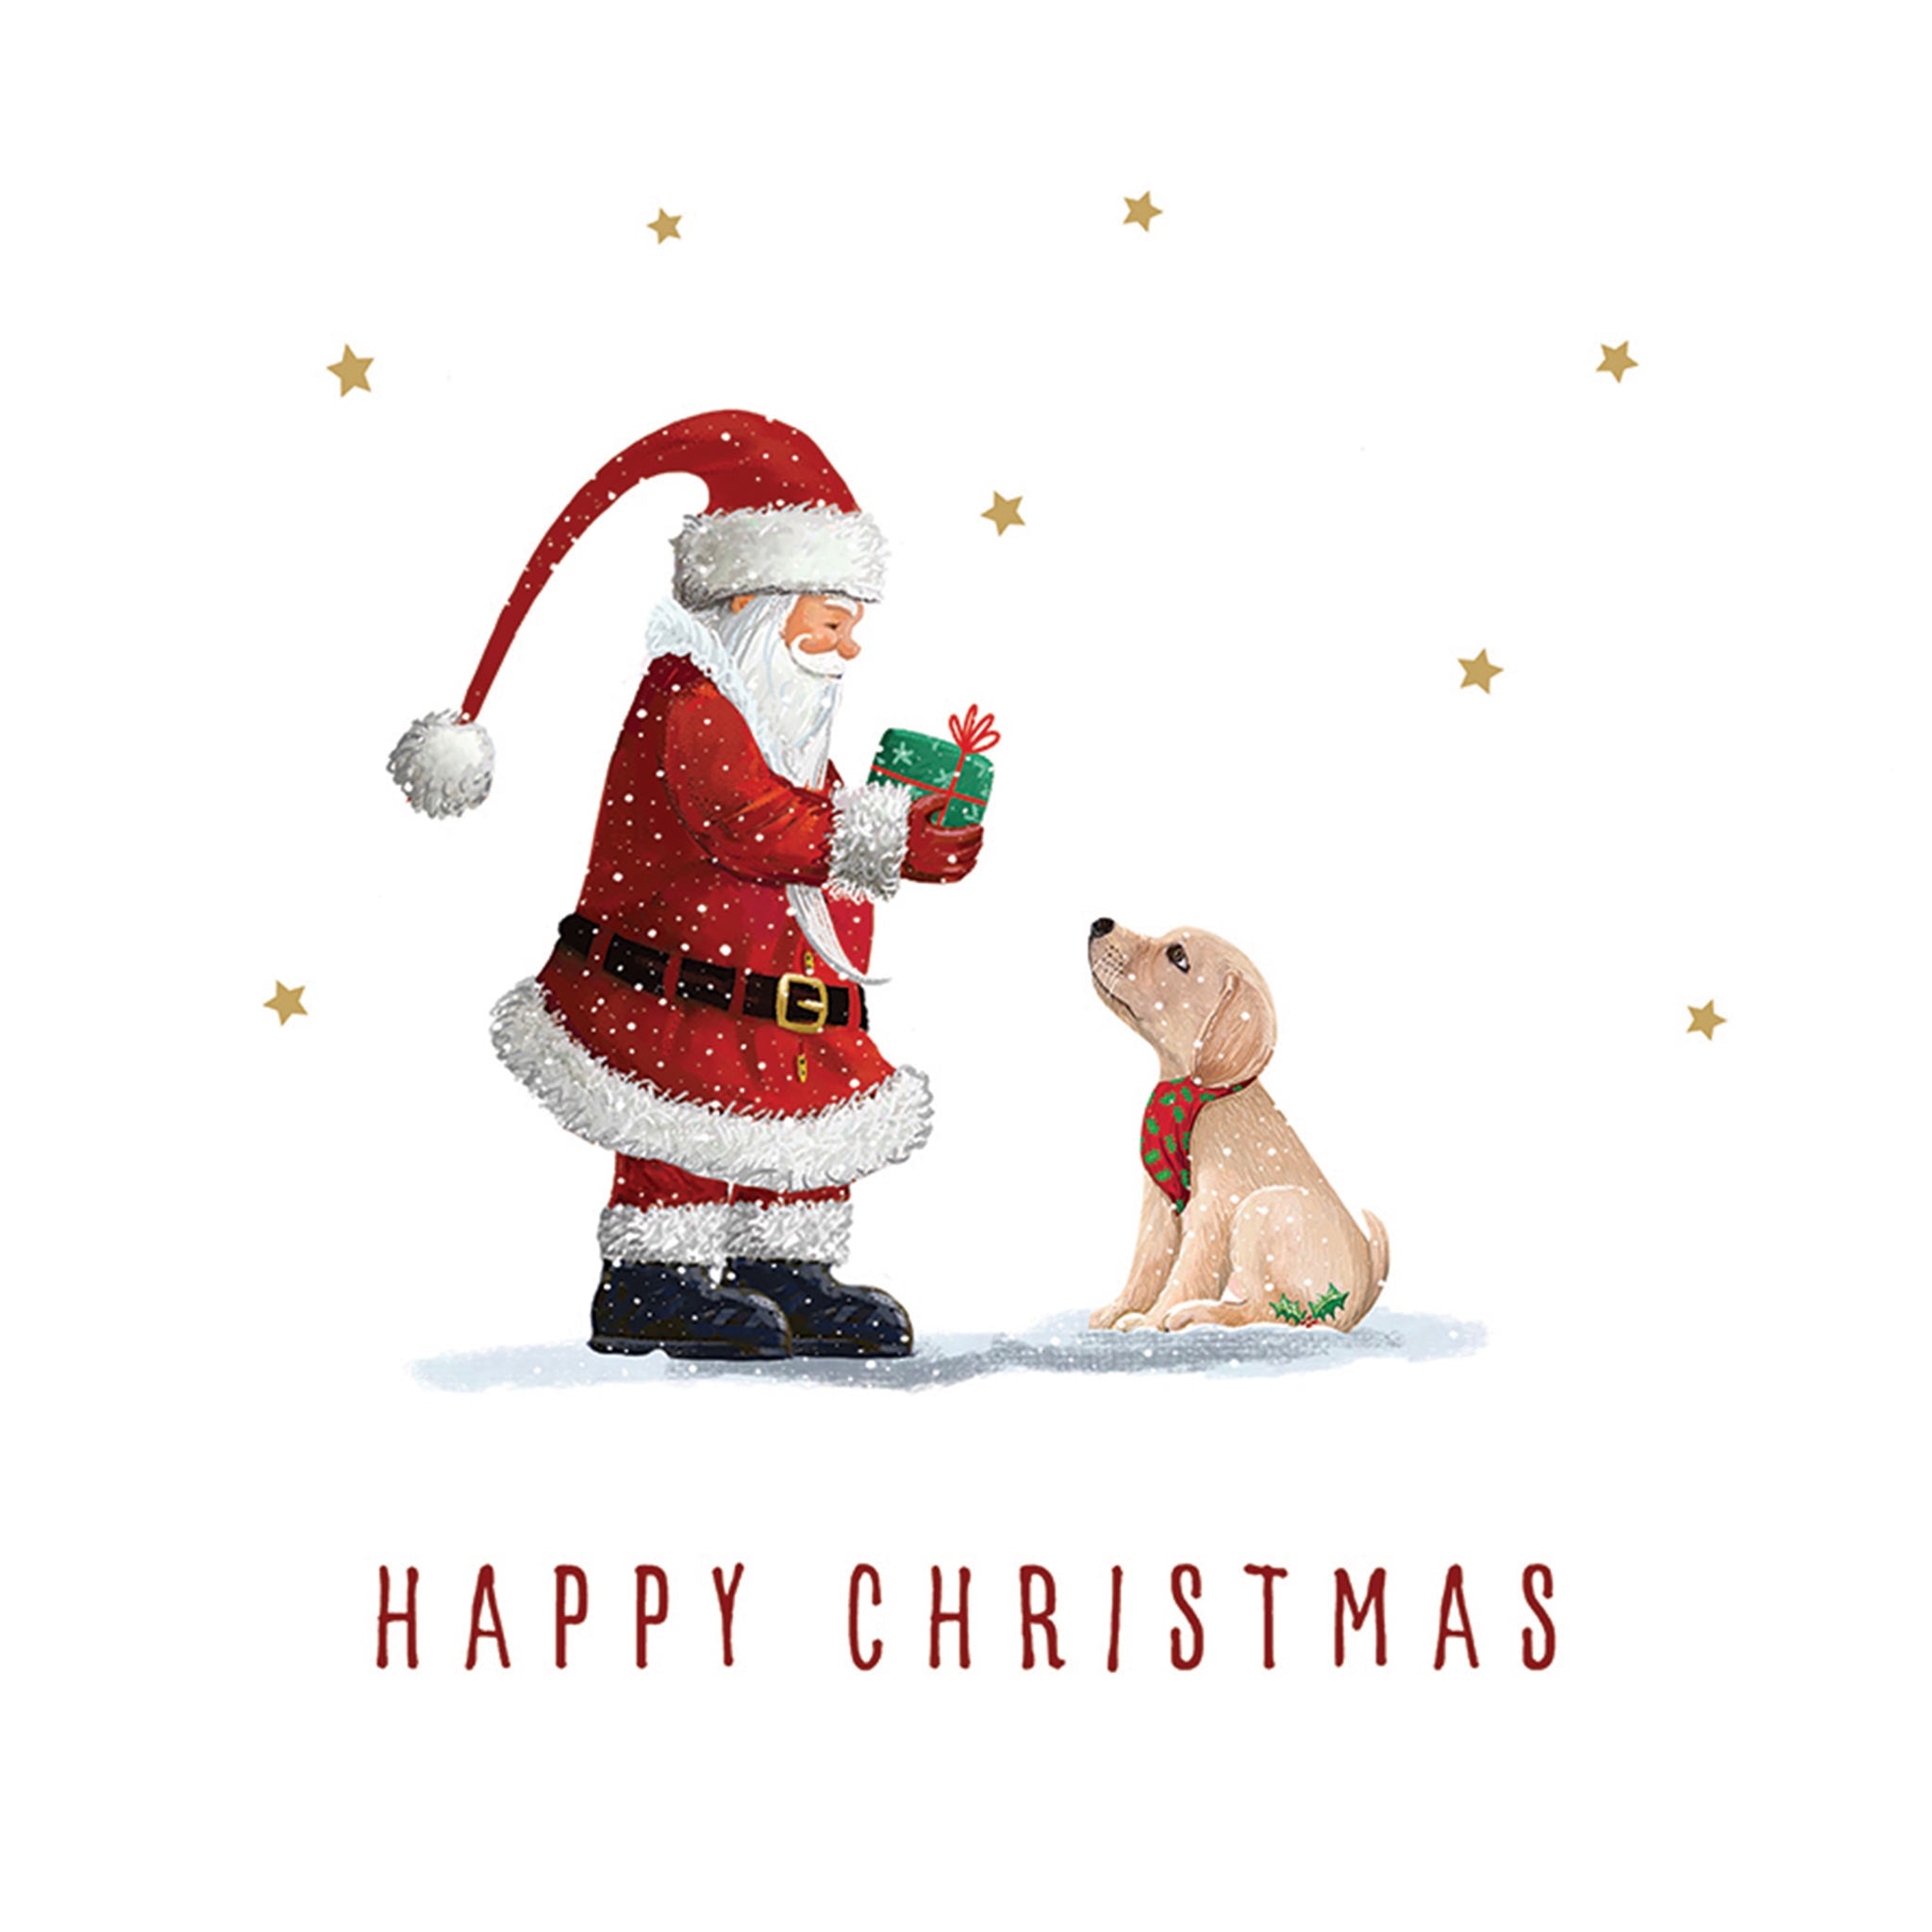 The design on this Christmas is an illustration of Father Christmas giving a present a yellow Labrador puppy. Text on the card reads "Happy Christmas"